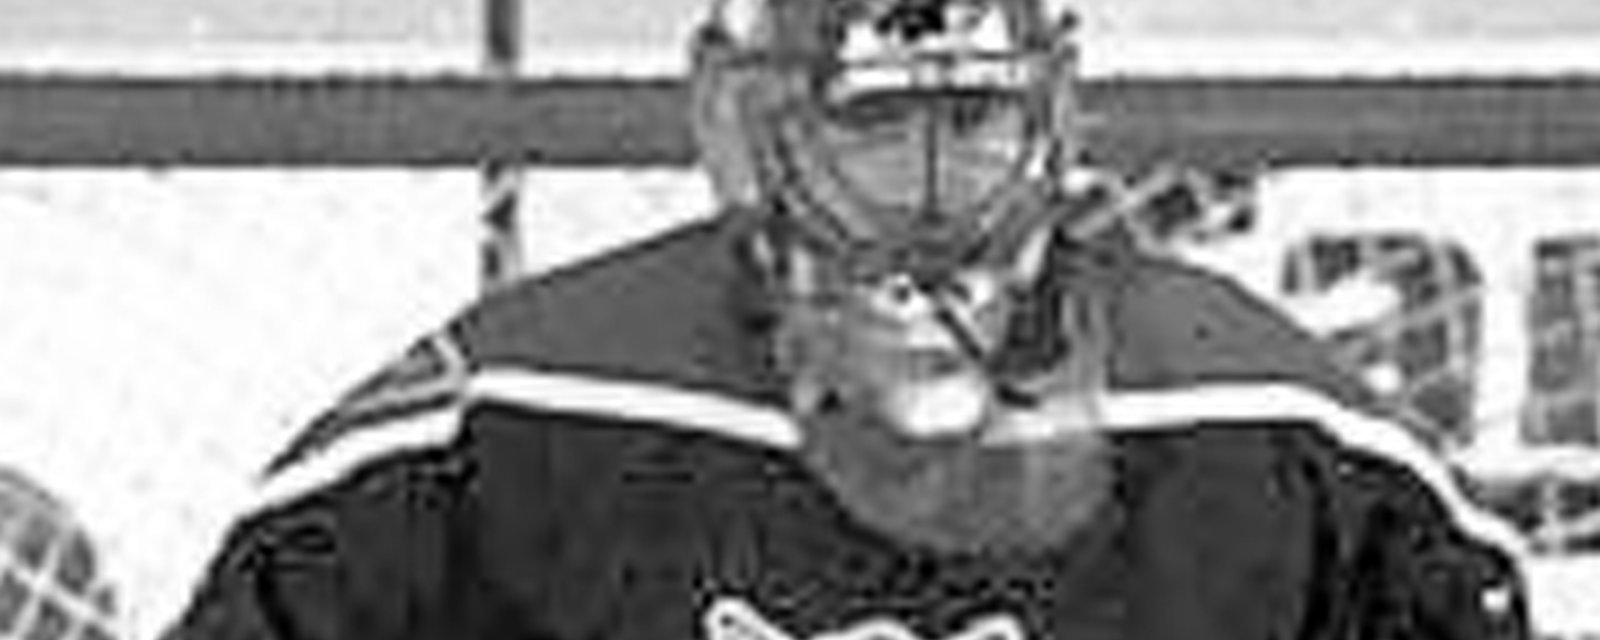 Former OHL goalie Gene Chiarello says hazing was “more damaging than brain cancer”